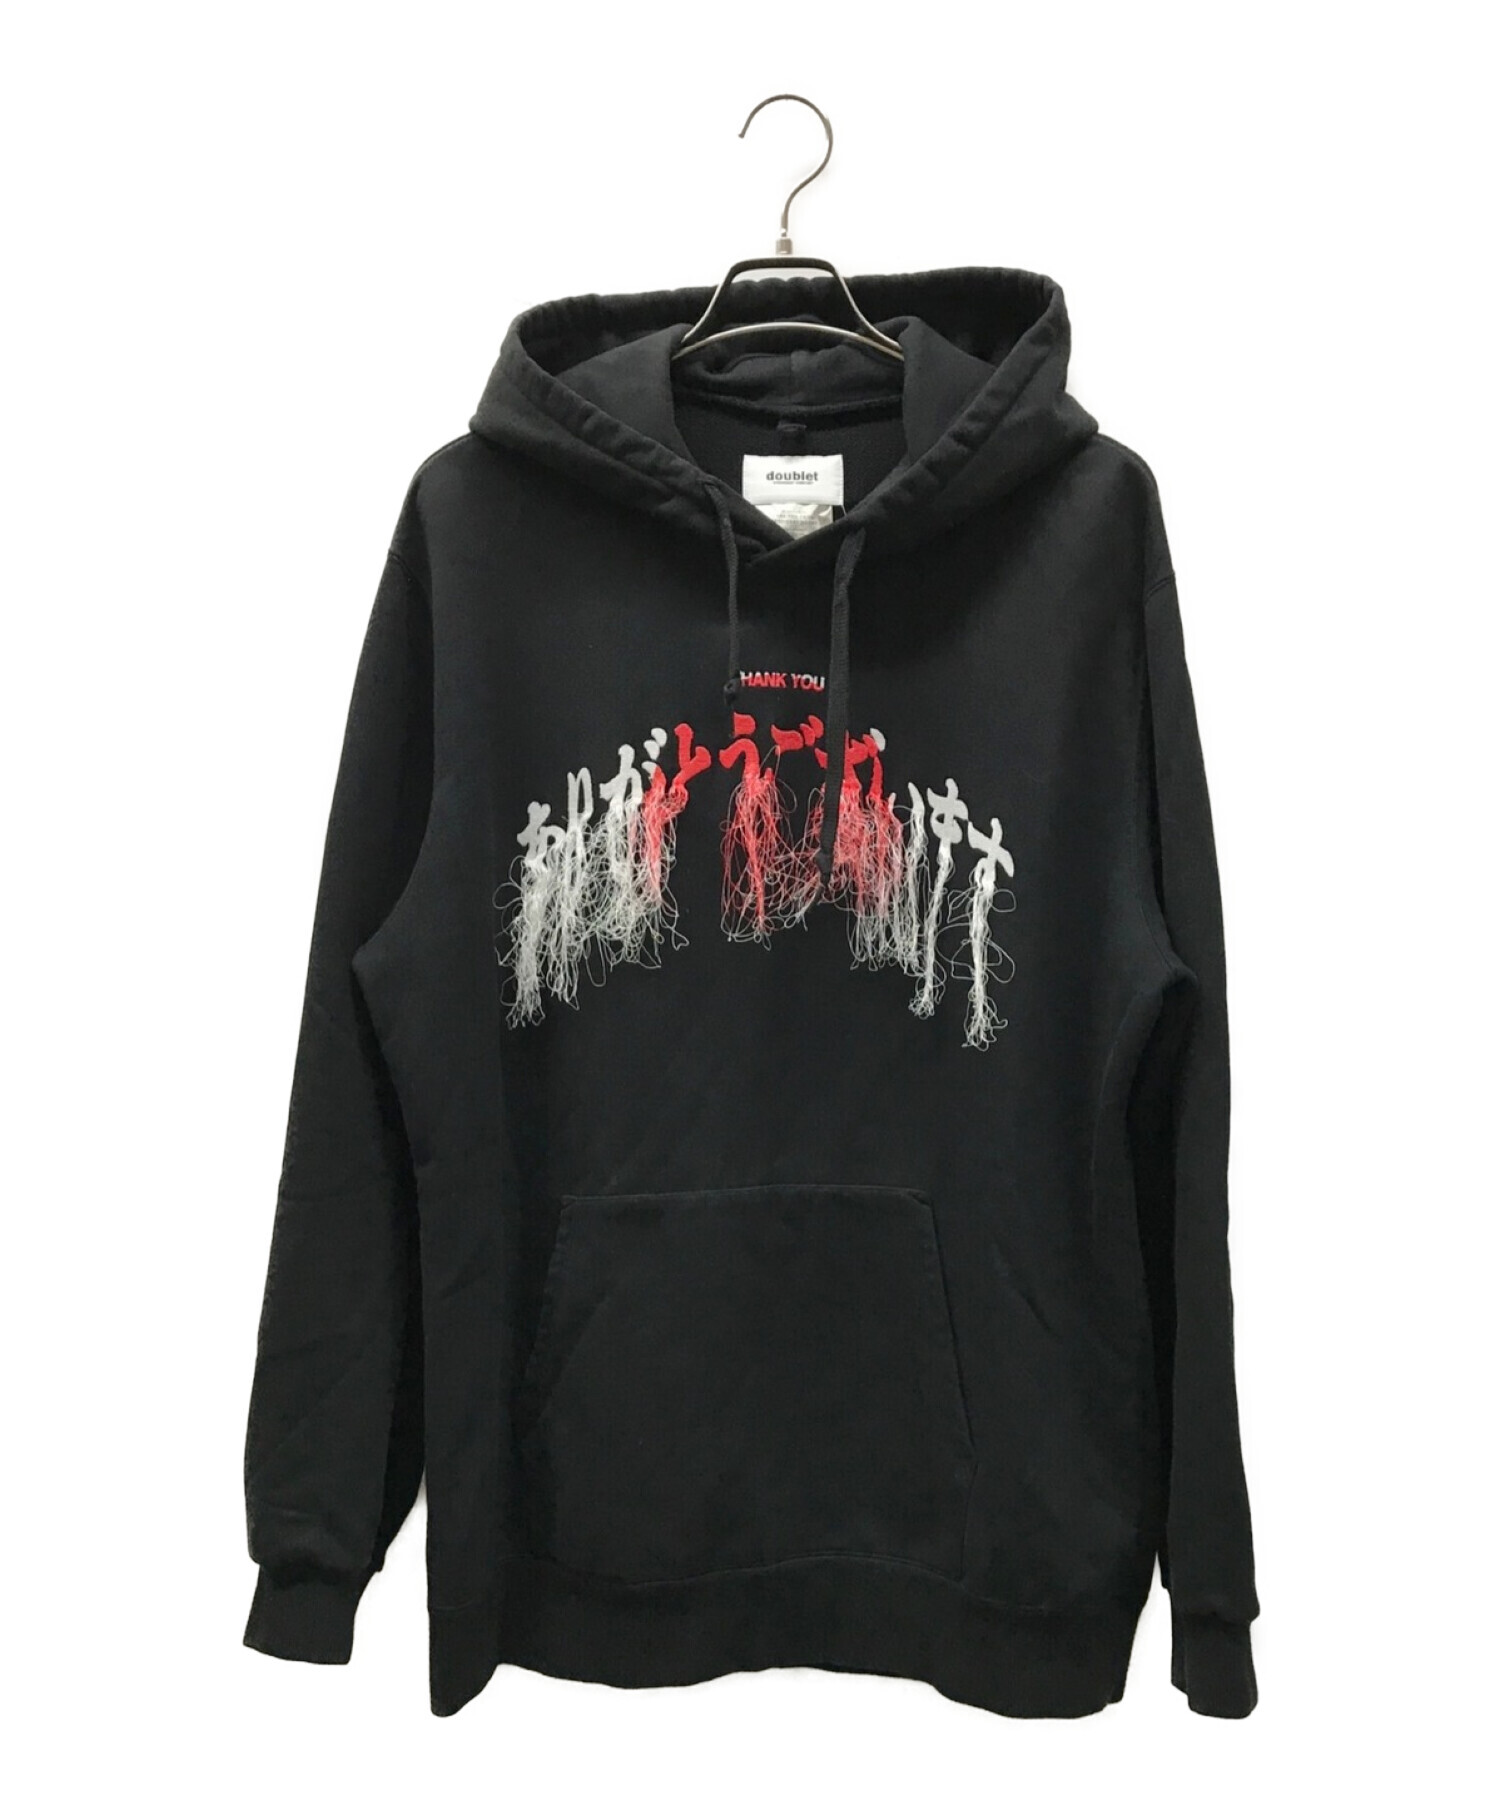 doublet (ダブレット) THANK YOU FRINGE EMBROIDERY HOODIE フリンジパーカー 20AW35CS165  ブラック サイズ:L